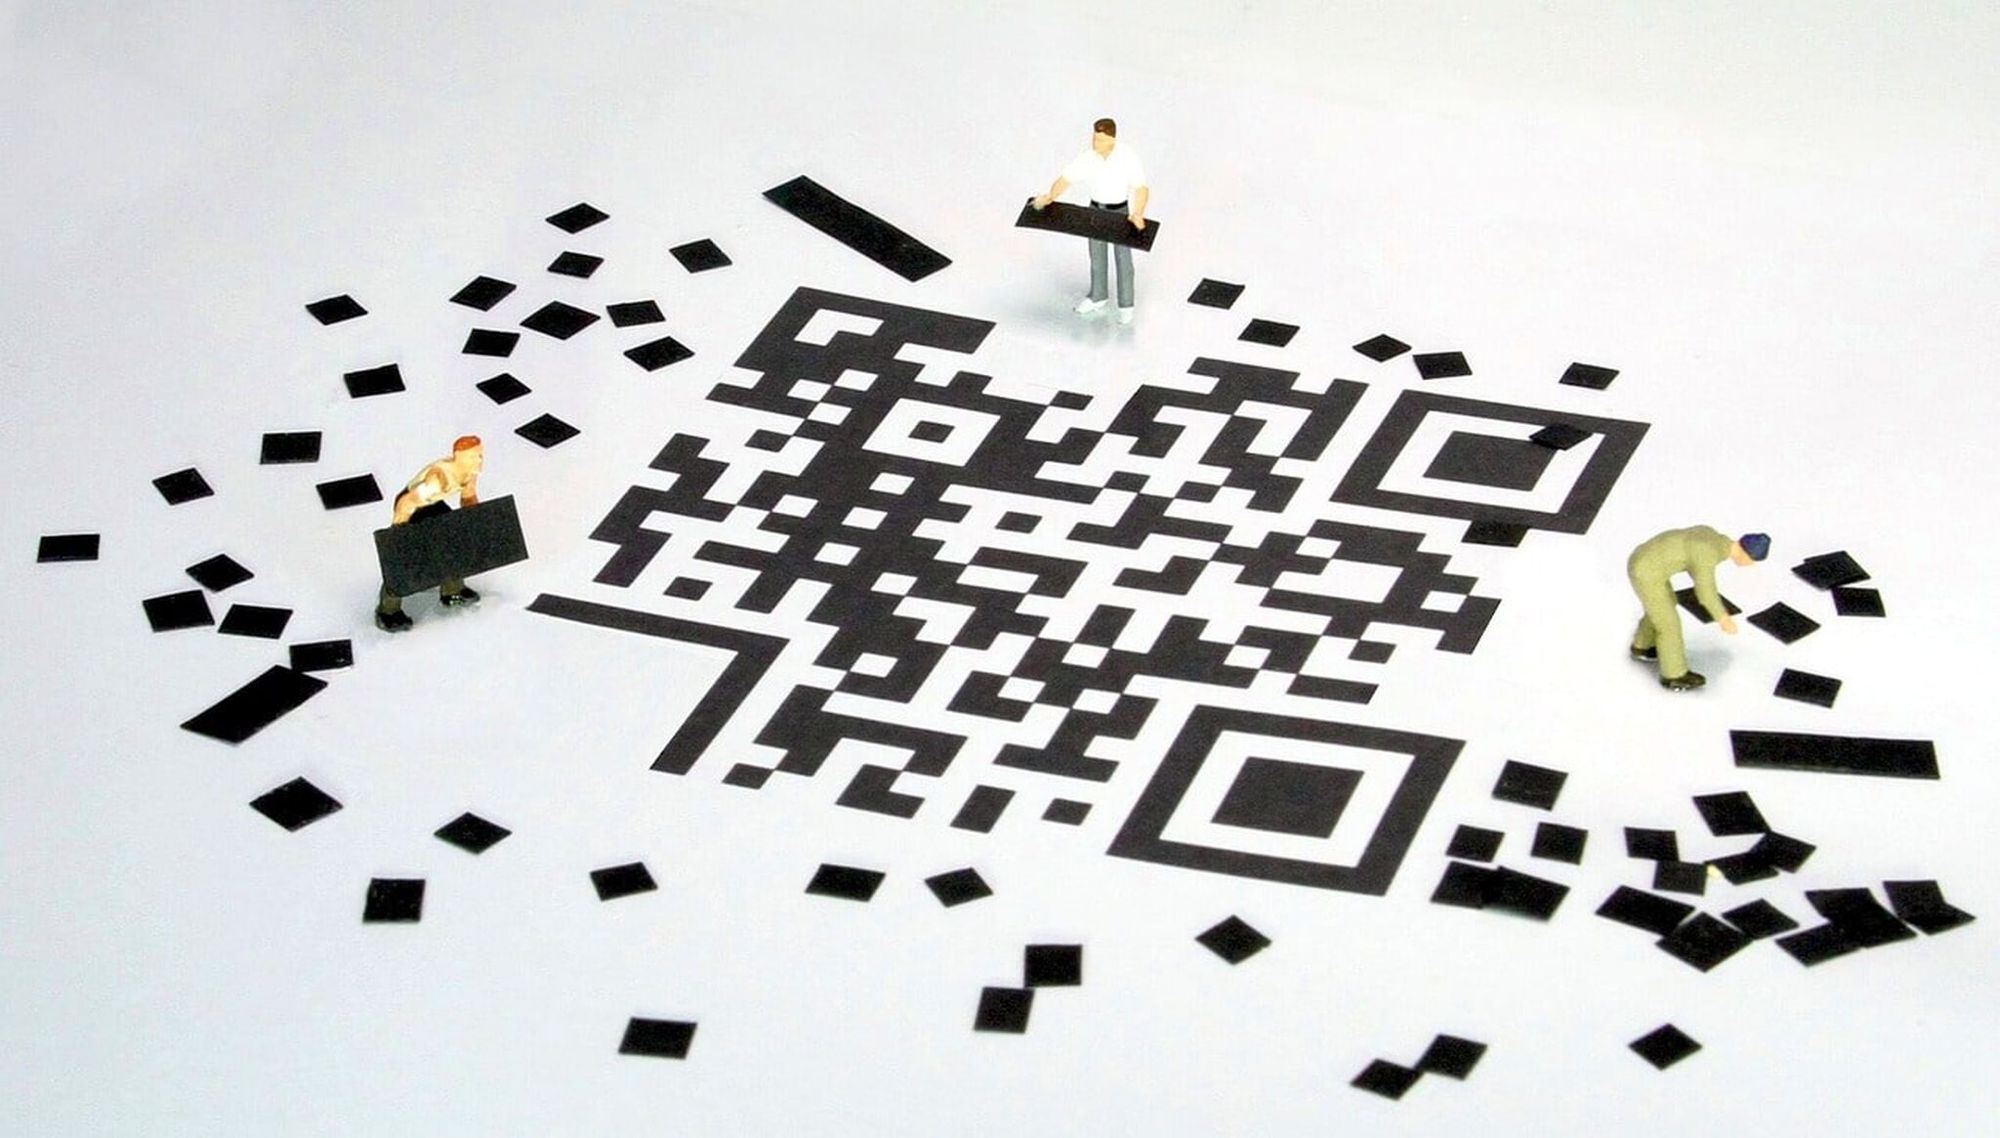 QR codes with miniature figures